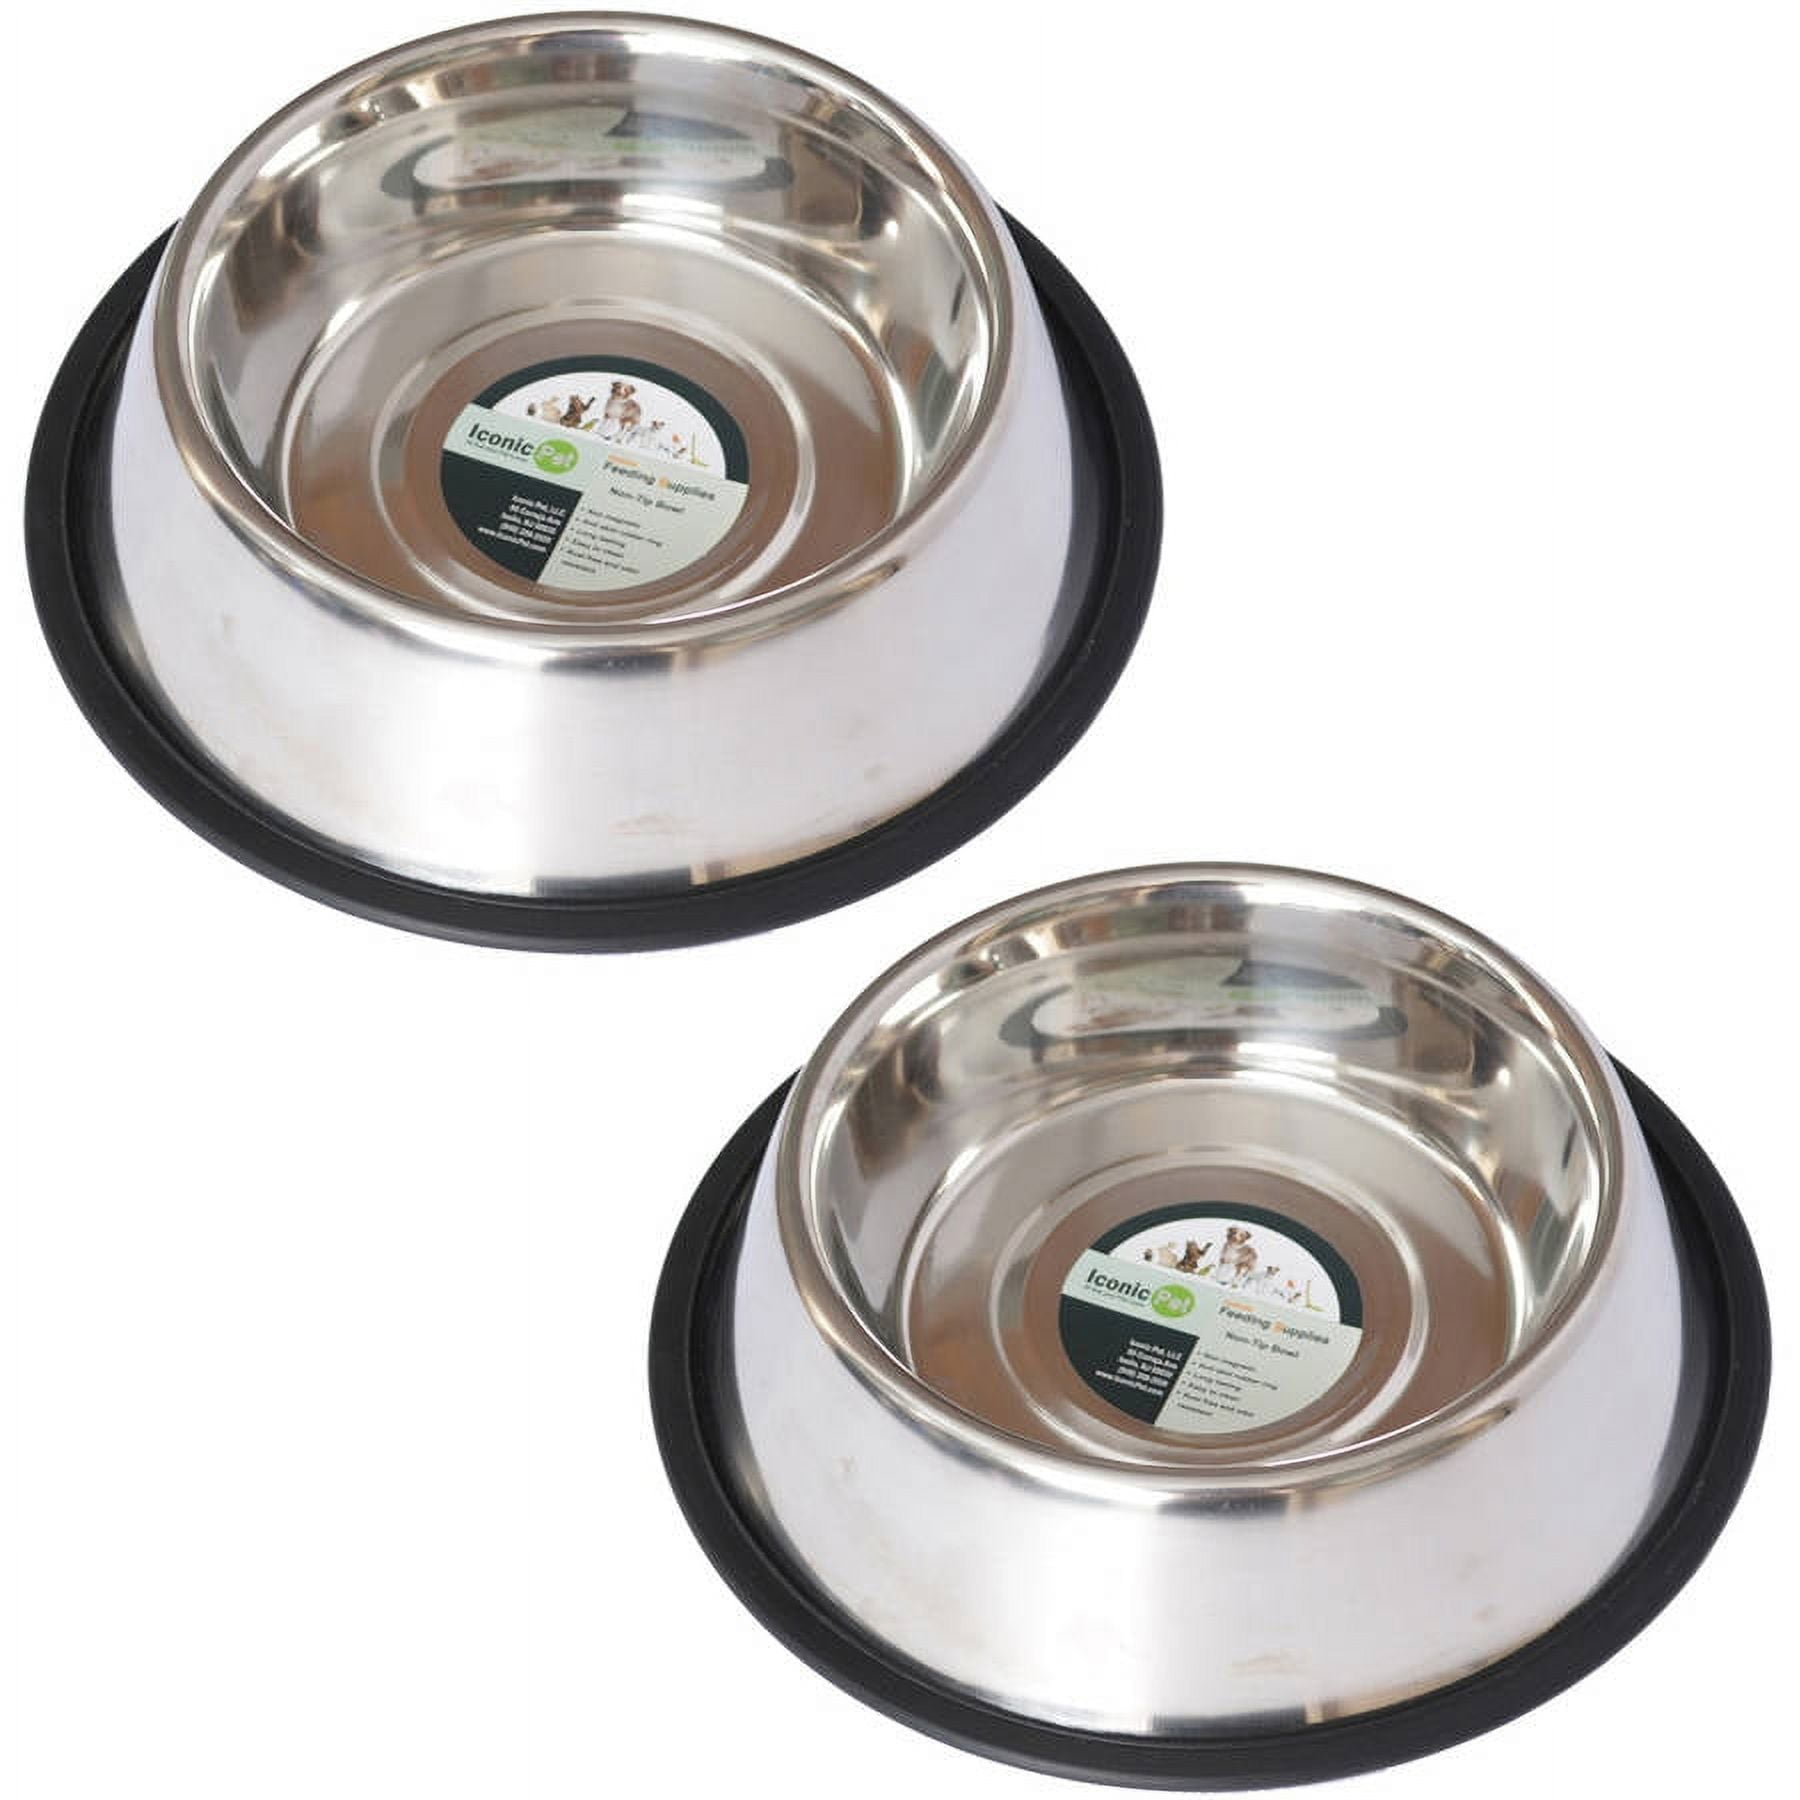 Iconic Pet 51412 16 Oz Stainless Steel Non-skid Pet Bowl For Dog Or Cat, Pack Of 2